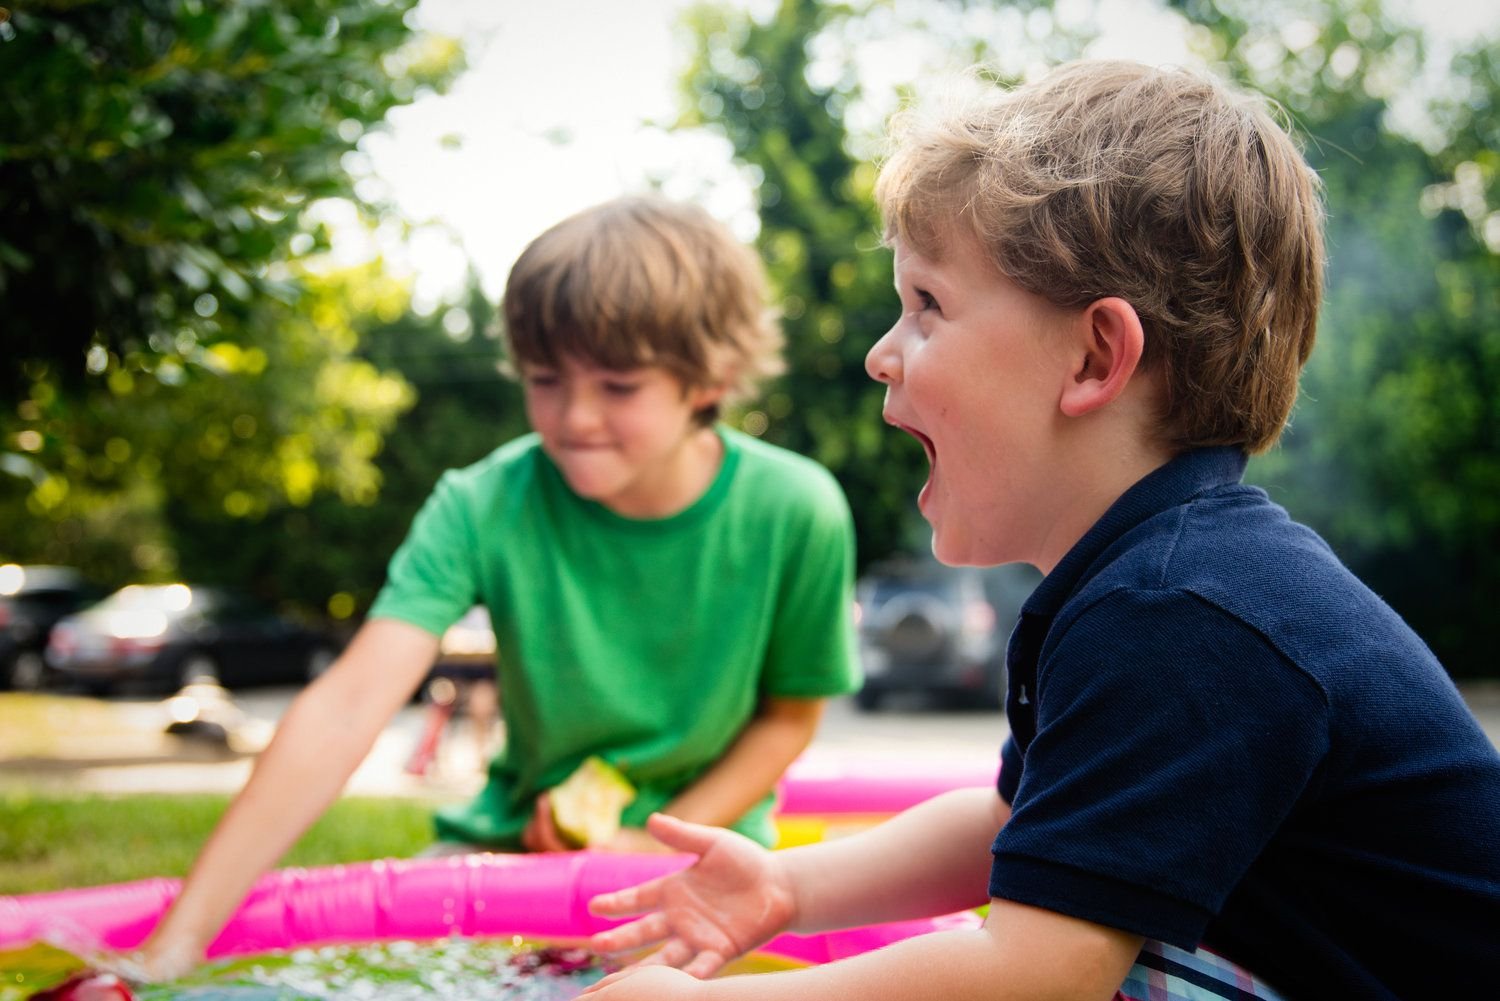 Summer Activities to do with your kids